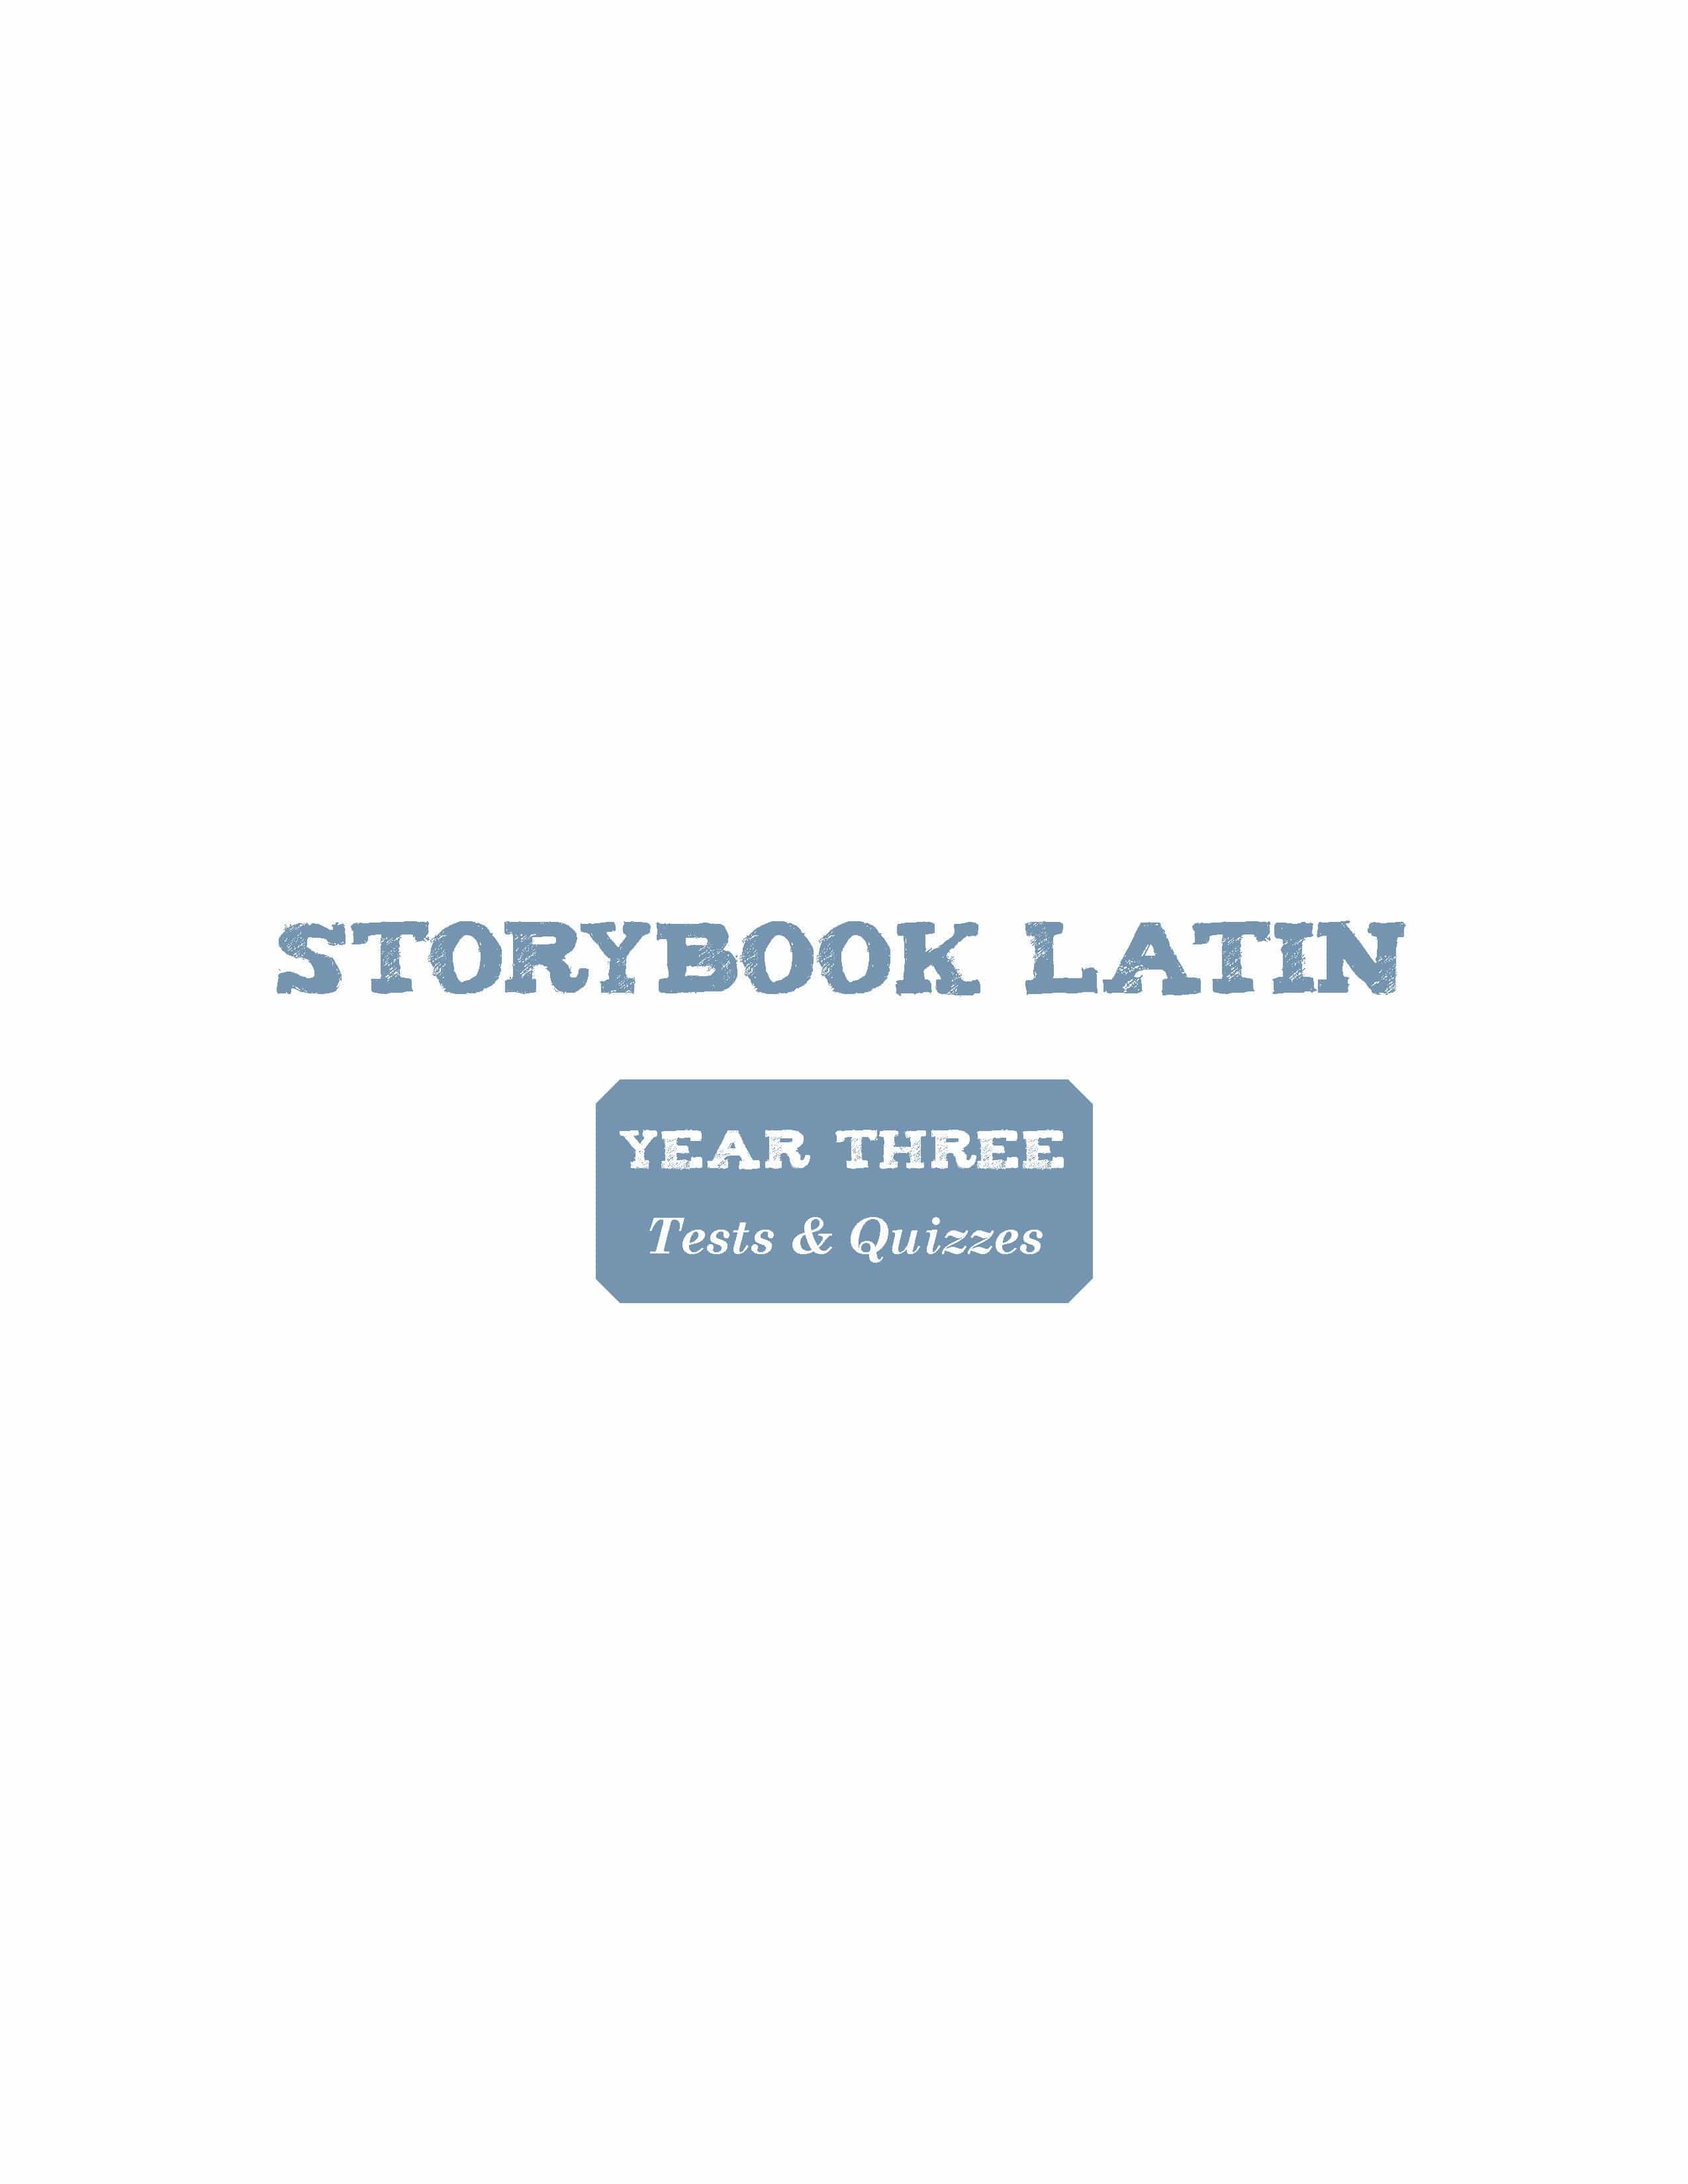 Storybook Latin Year 3 Tests & Quizzes